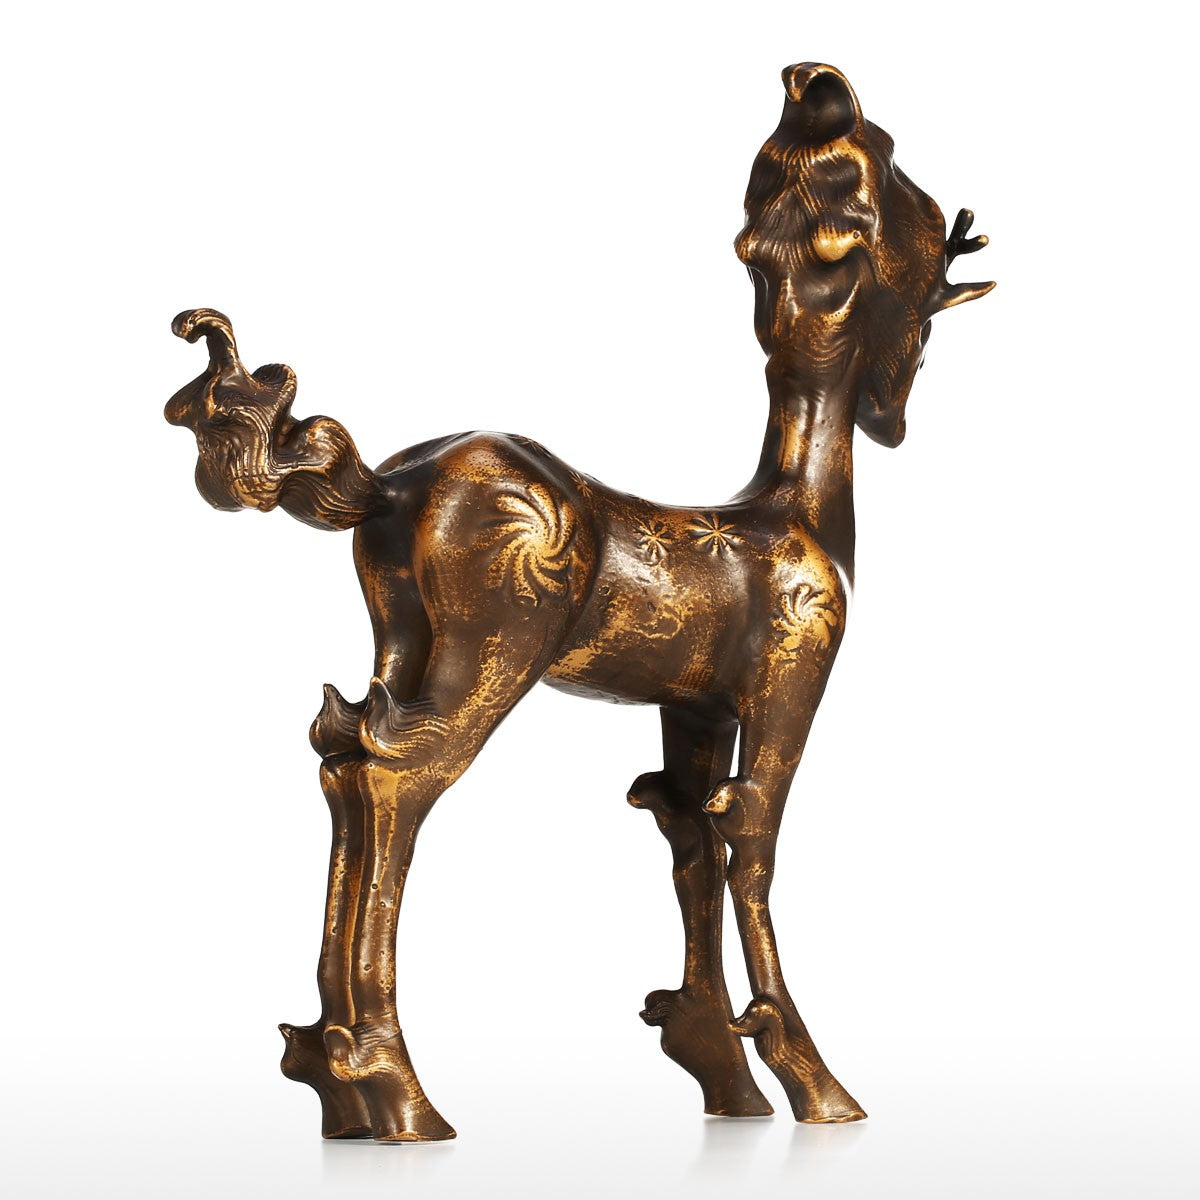 Deer Statue and Bronze Deer Statue with Good Christmas Gifts for Christmas Decorations